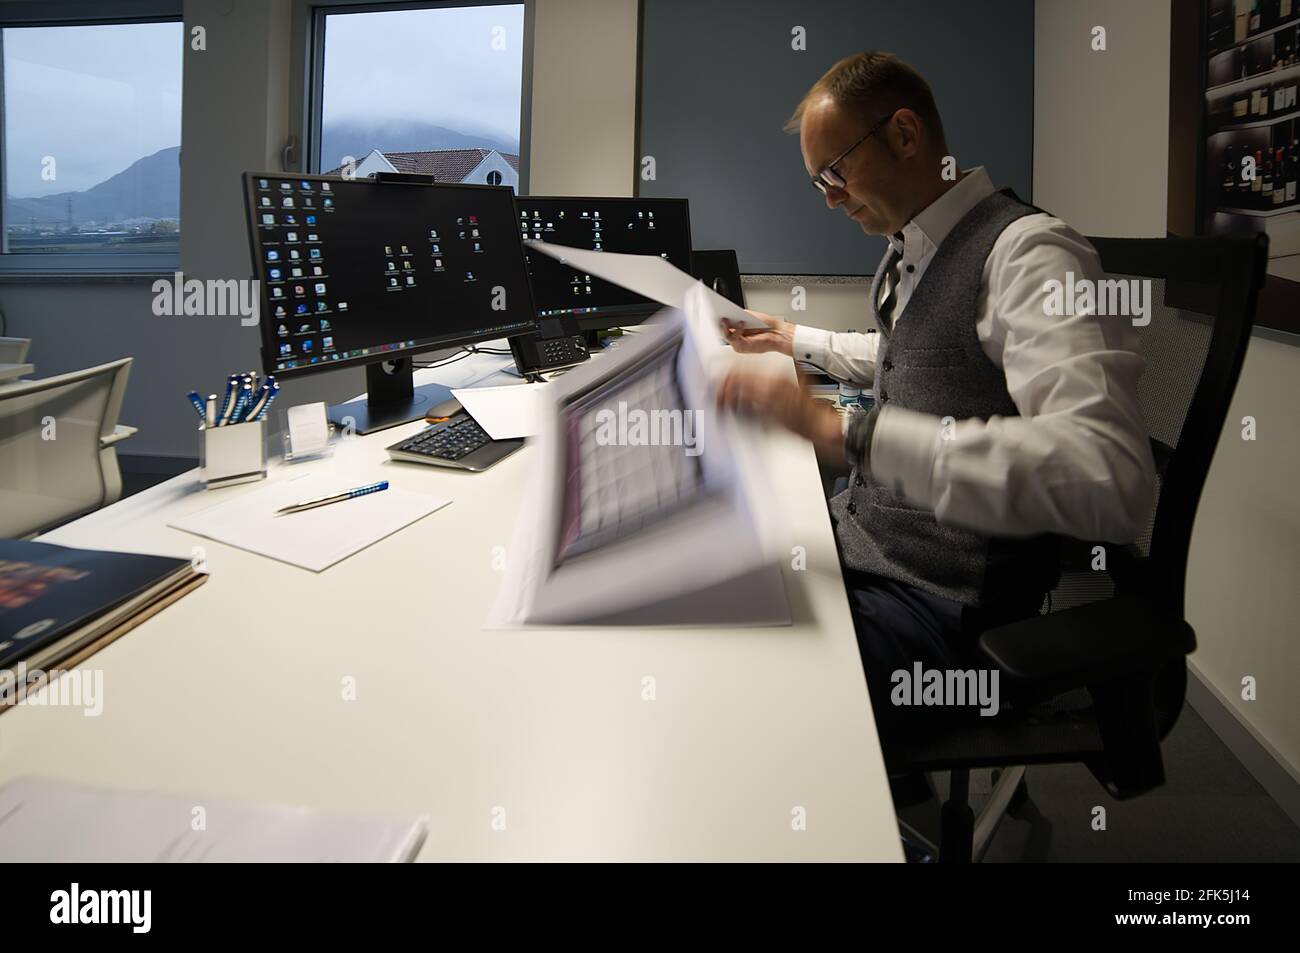 A manager - Caucasian male in his office sitting behind the desk looking at the files. Stock Photo